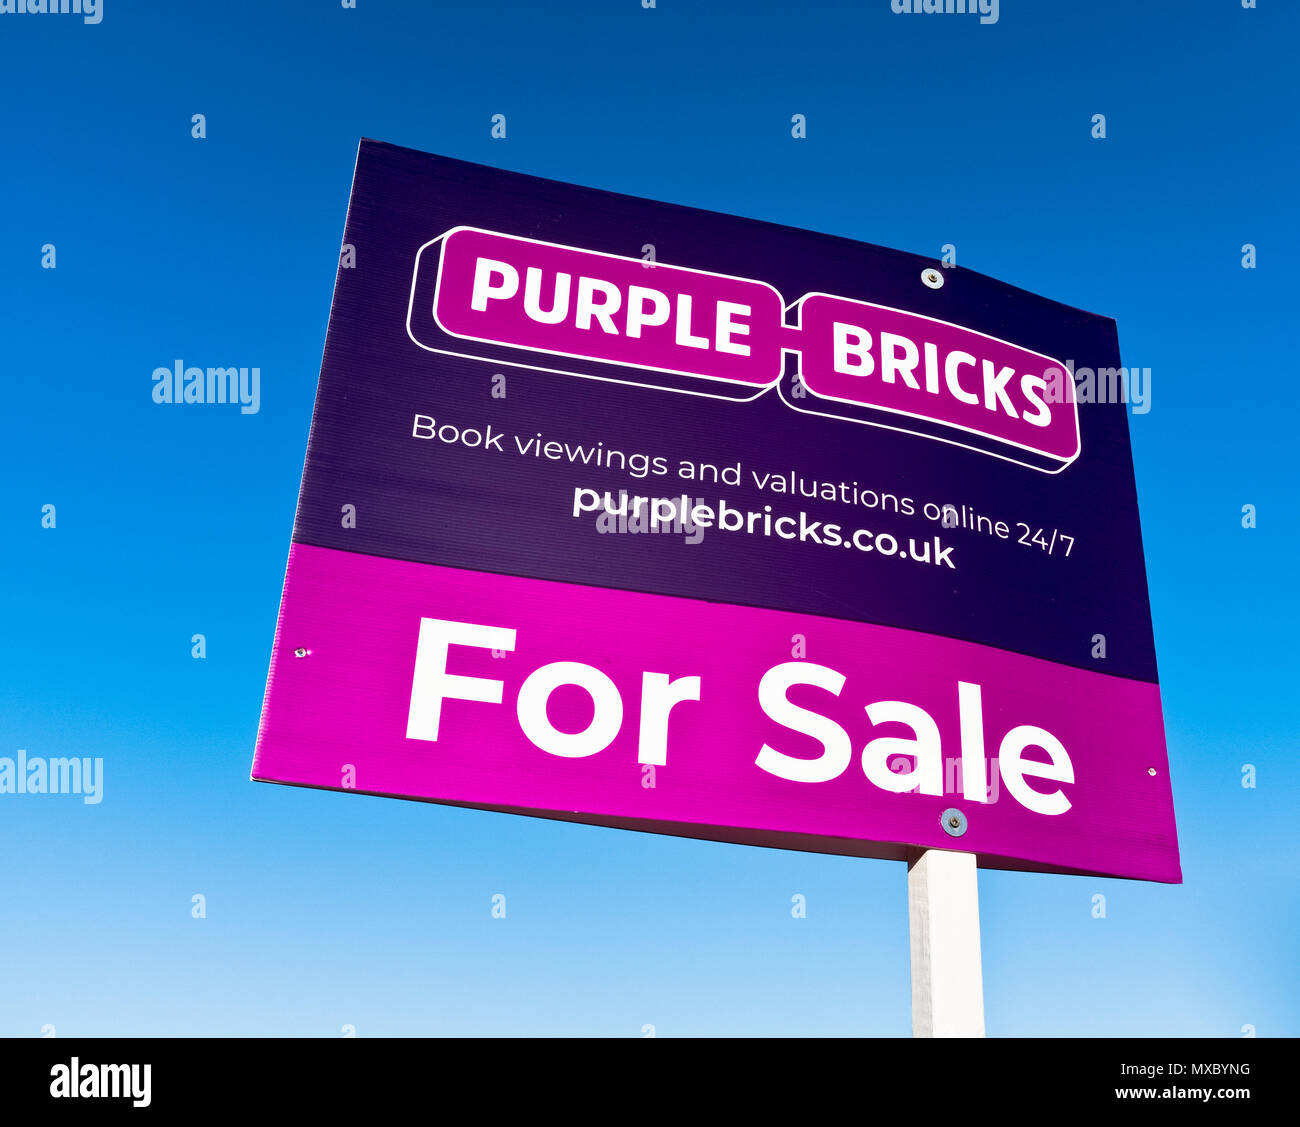 dh Property for sale HOUSING UK Market Purple Bricks housing sign selling properties logo estate agents house agency signs Foto Stock